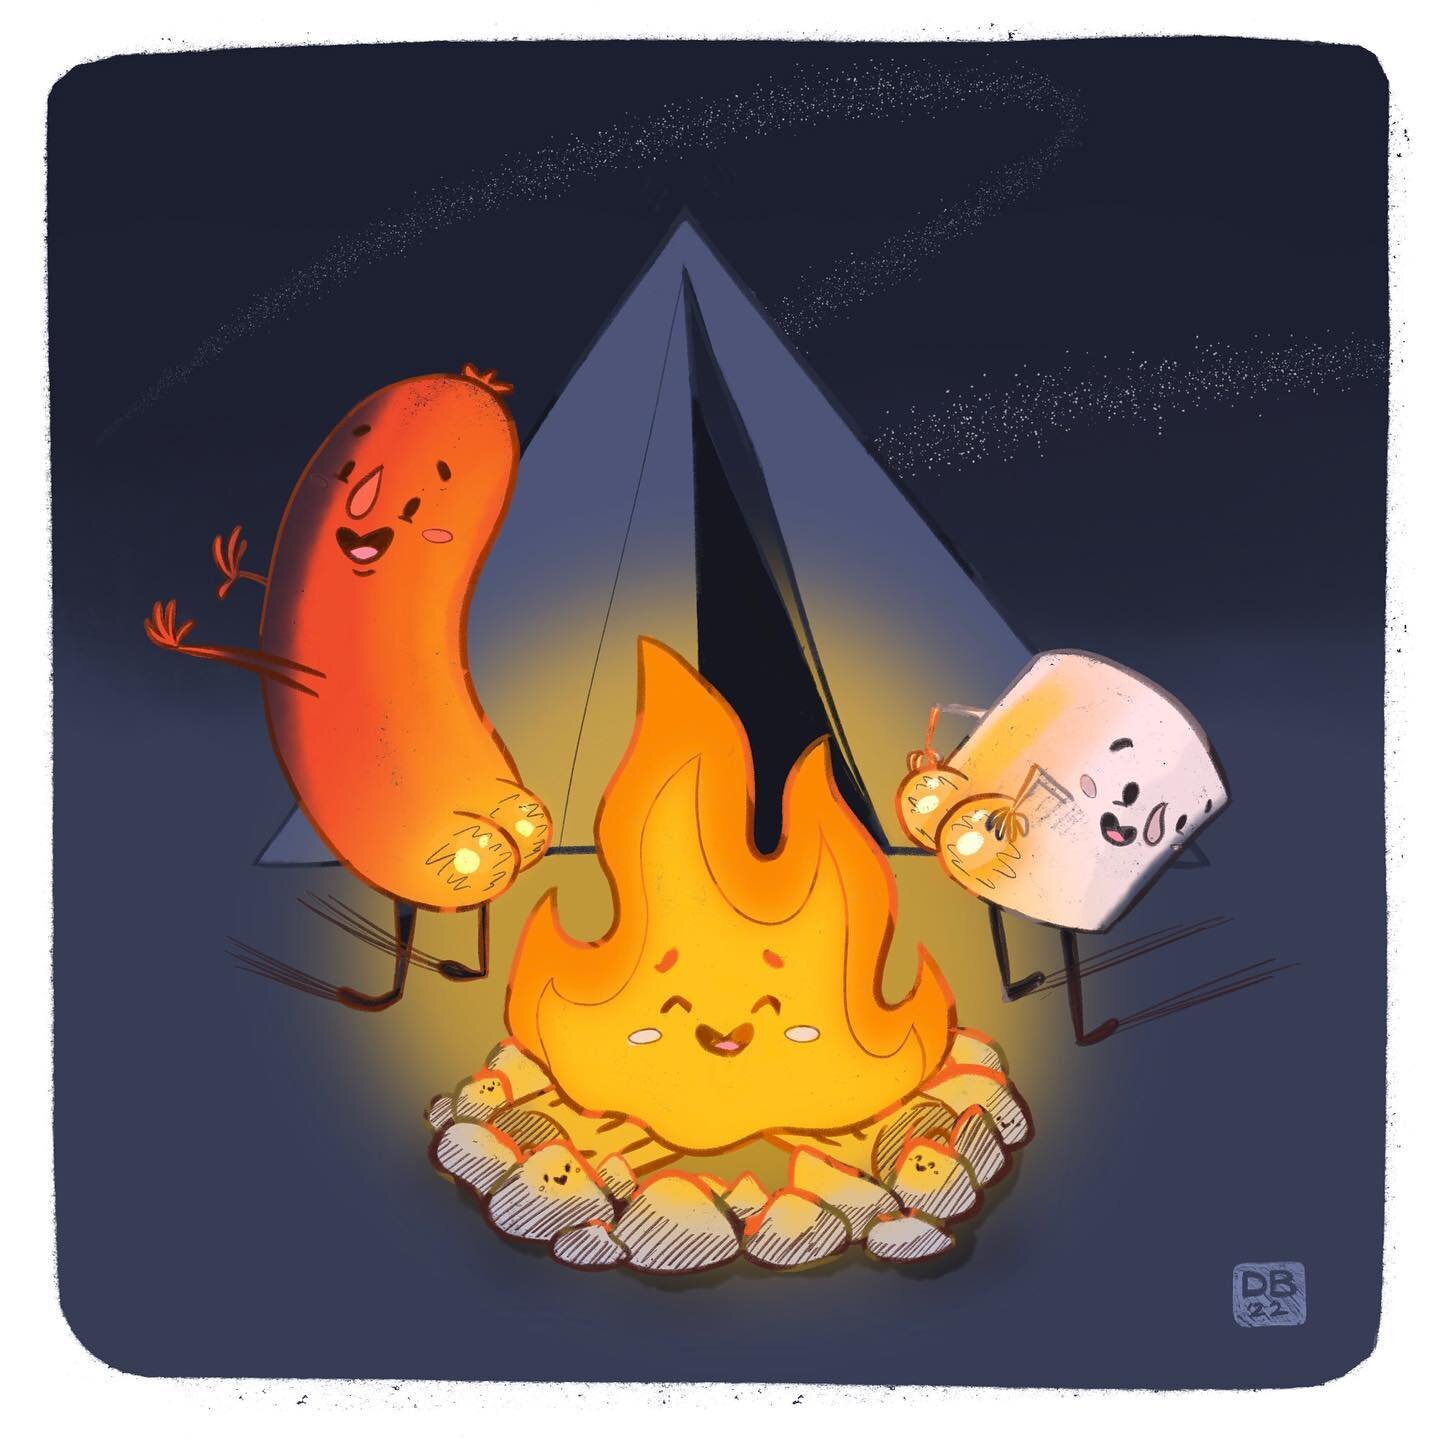 Day 7: By the Campfire 🔥
Might not be super spooky, but these boys toastin&rsquo; their buns popped into my head when I saw the prompt and I couldn&rsquo;t resist.

Maybe I&rsquo;ll make a plushie version of this someday 😊 But for now, enjoy some t